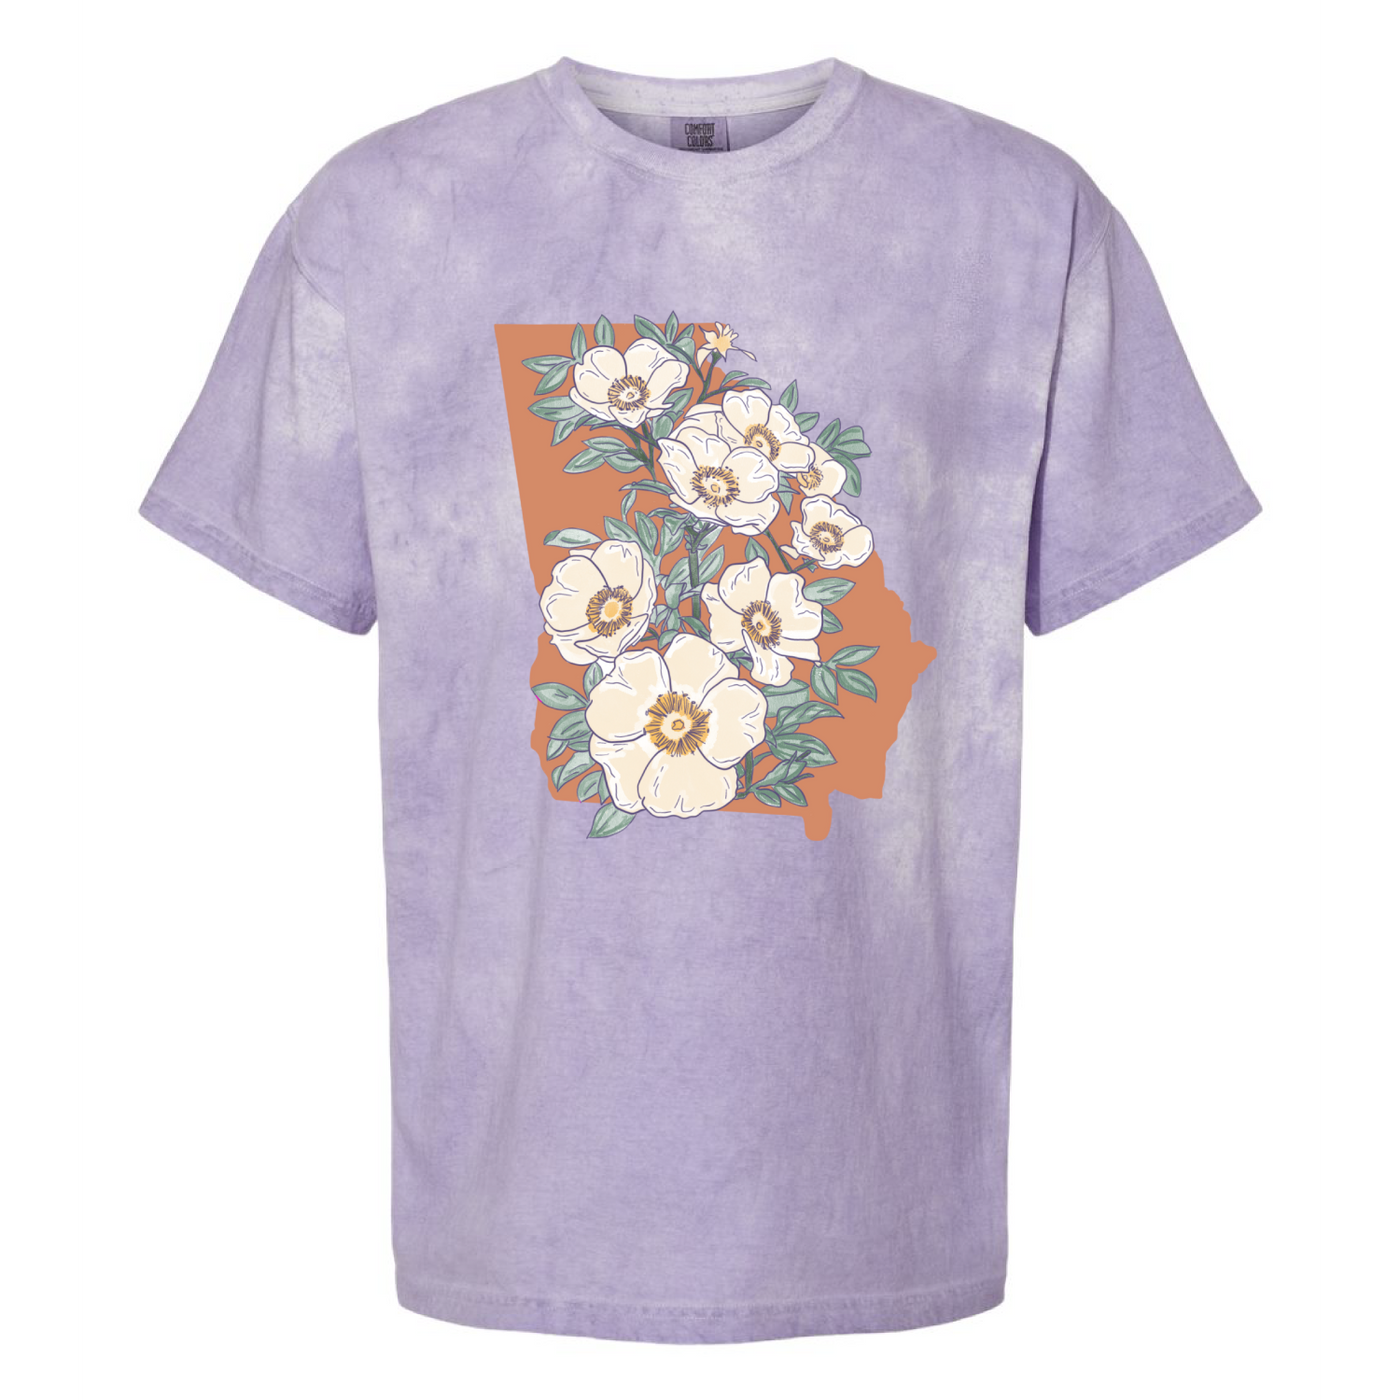 An amethyst colorblast tee with a graphic of the state of Georgia in peach covered with the state flower of Georgia.